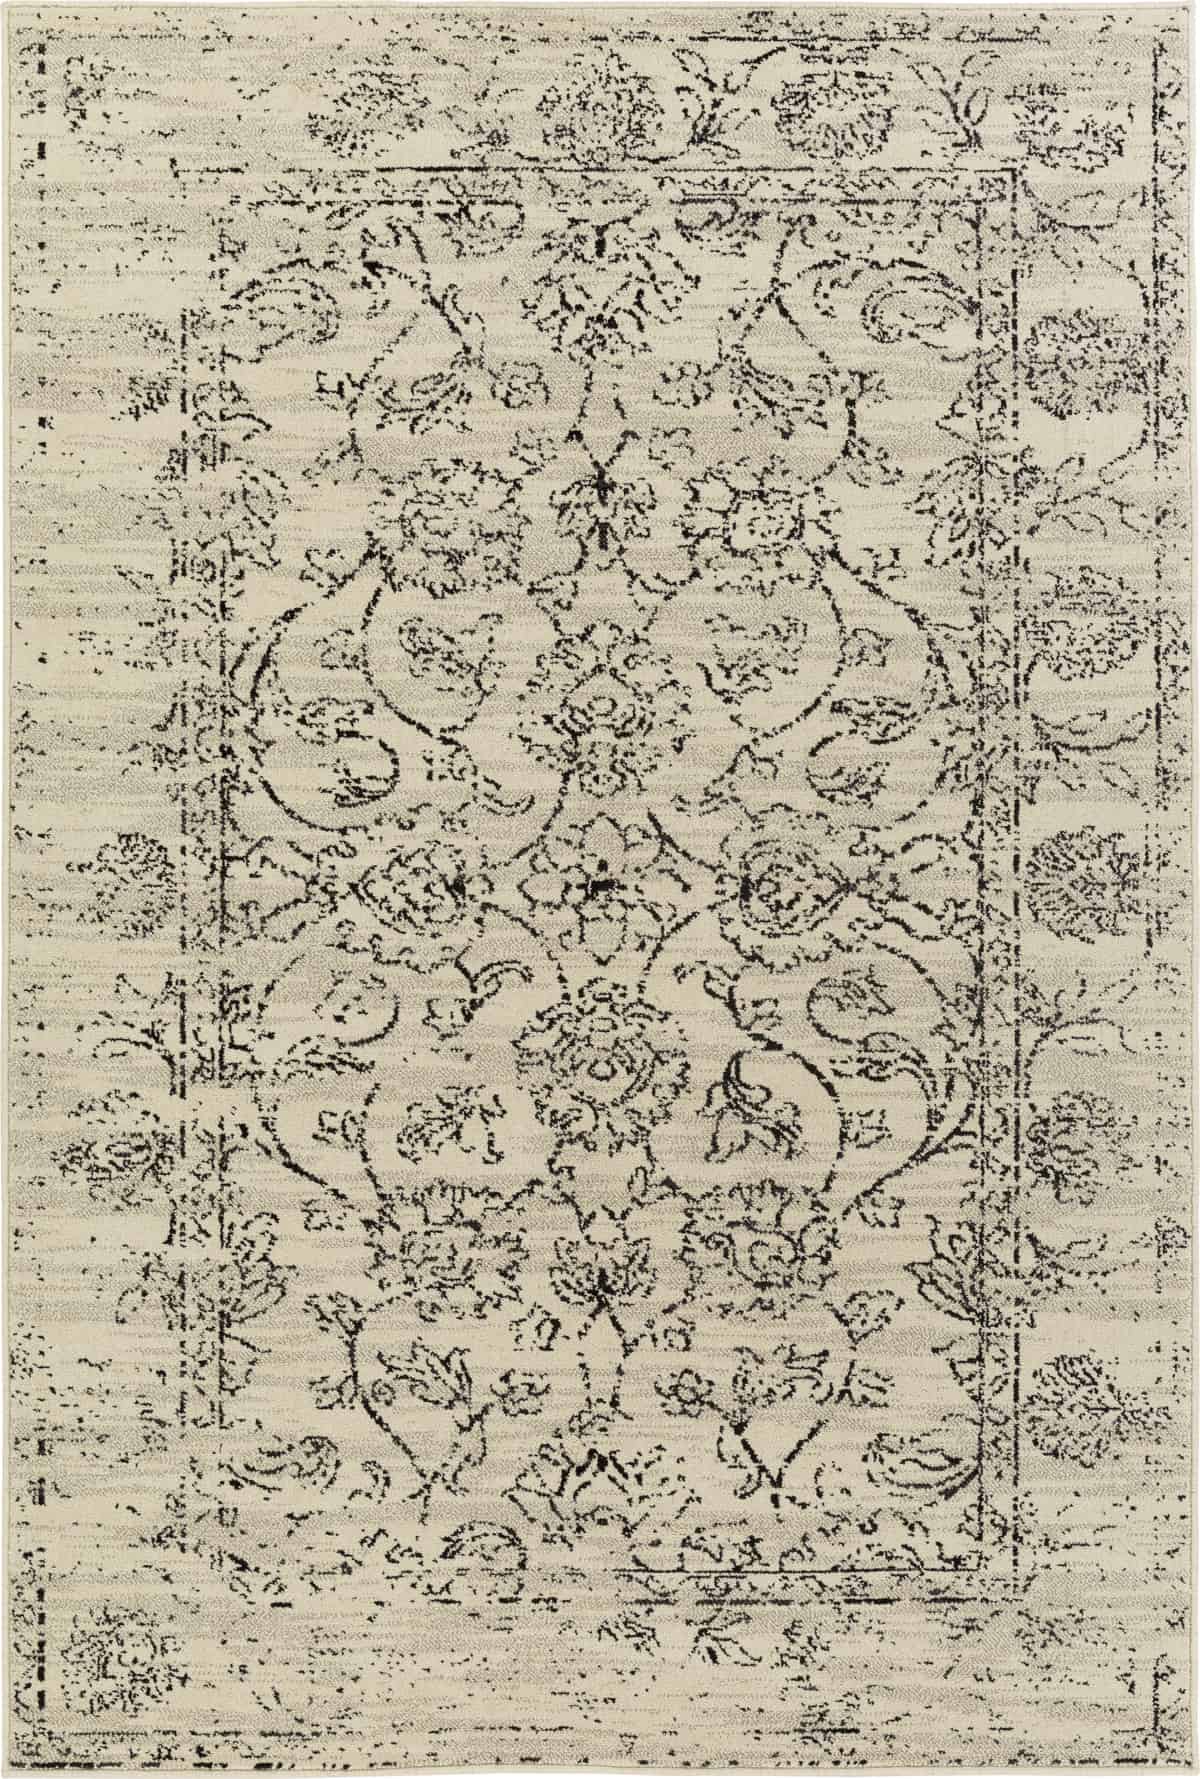 An ornate vintage tan and black area rug with detailed floral design.